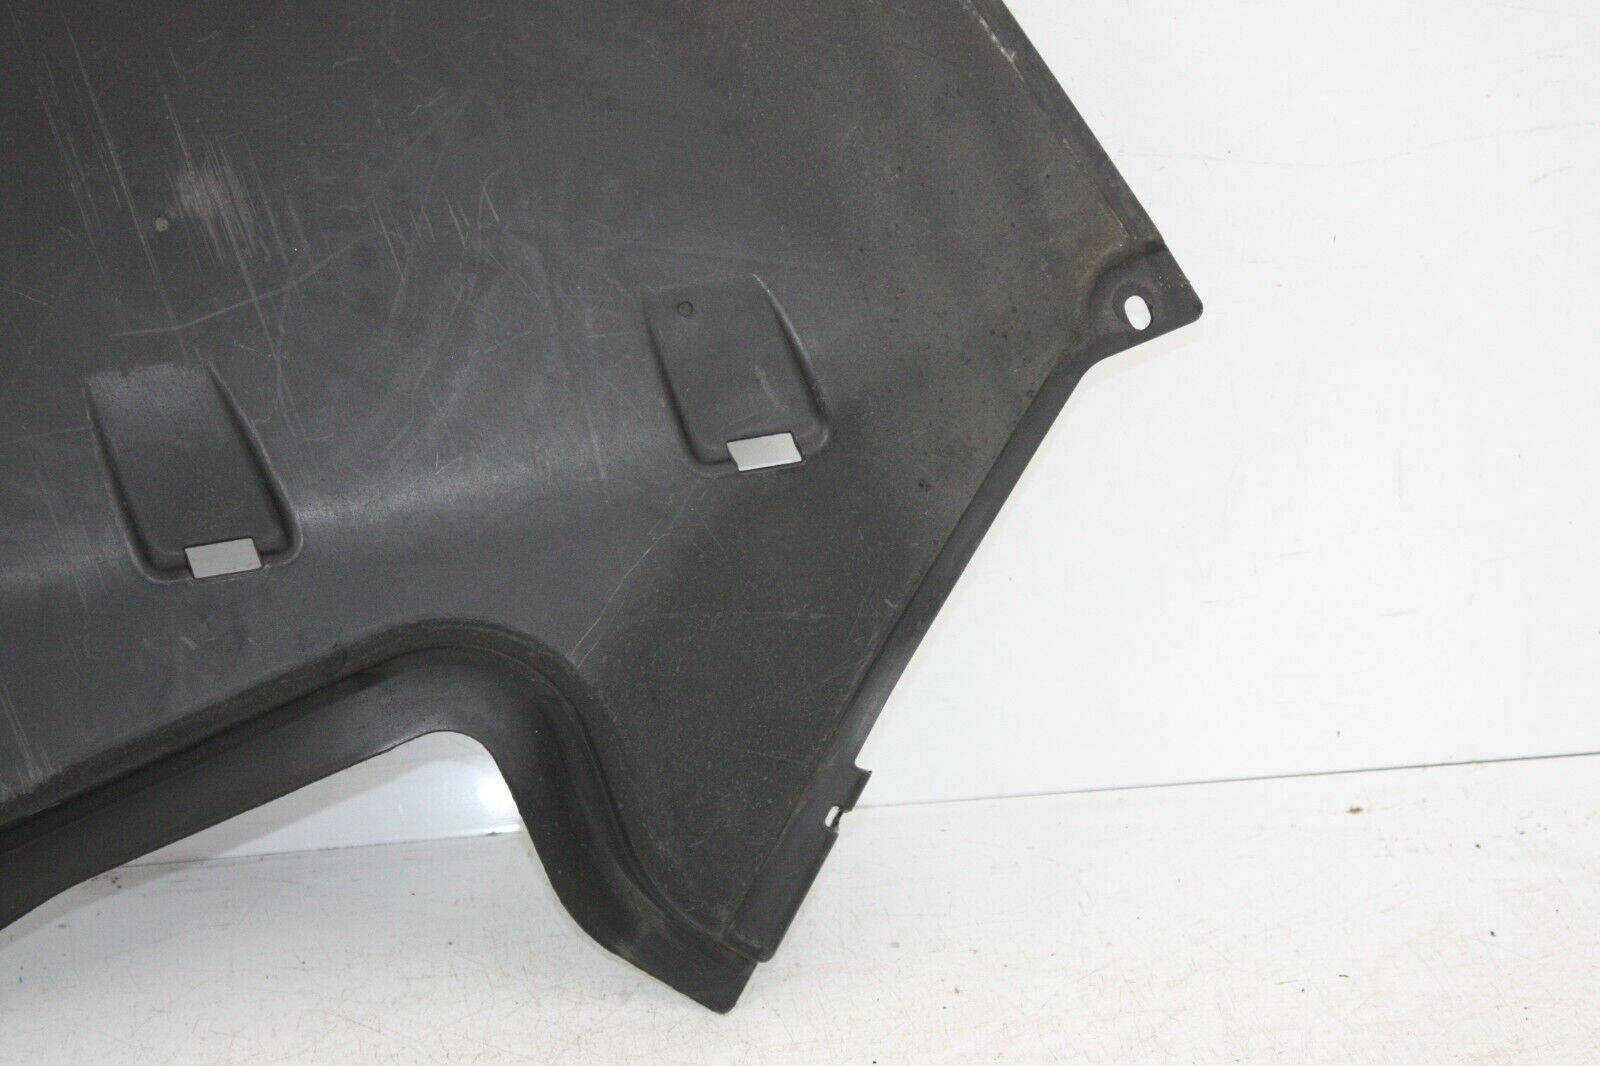 Audi-A4-Rear-Right-Underbody-Tray-Cover-2015-TO-2018-8W0825219A-175367535392-4